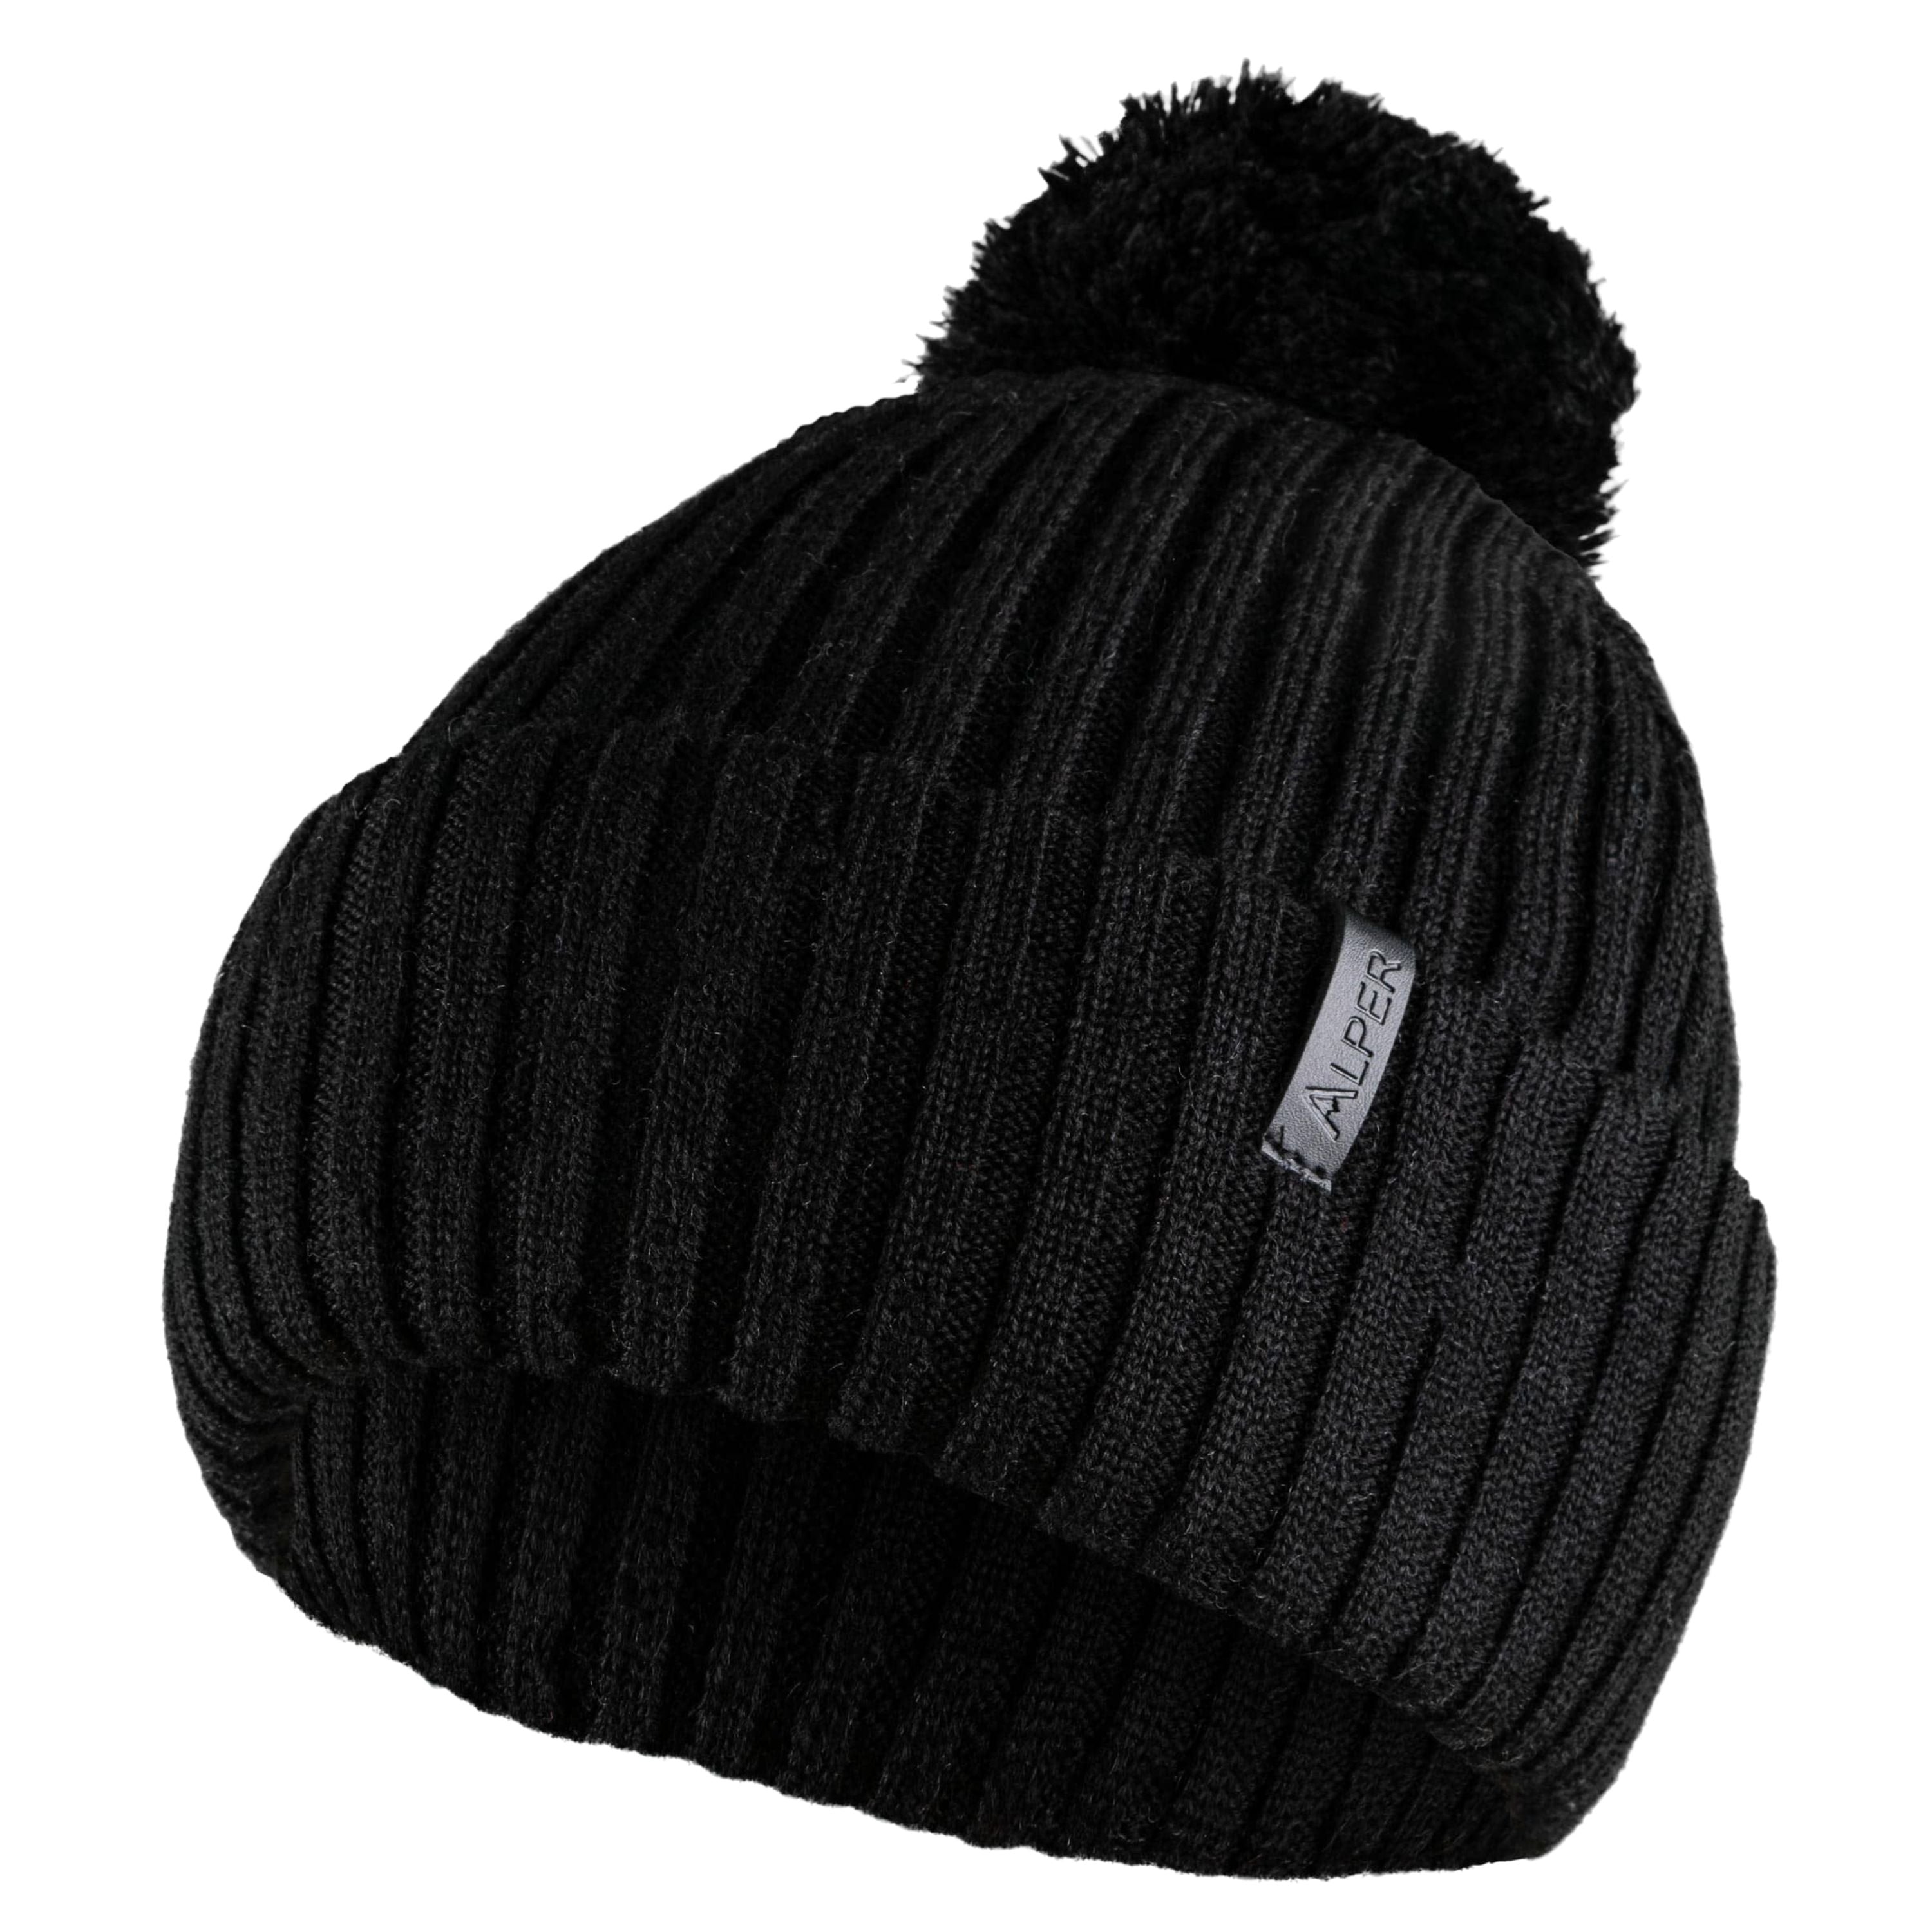 Tuque "Lubiana" - Femme